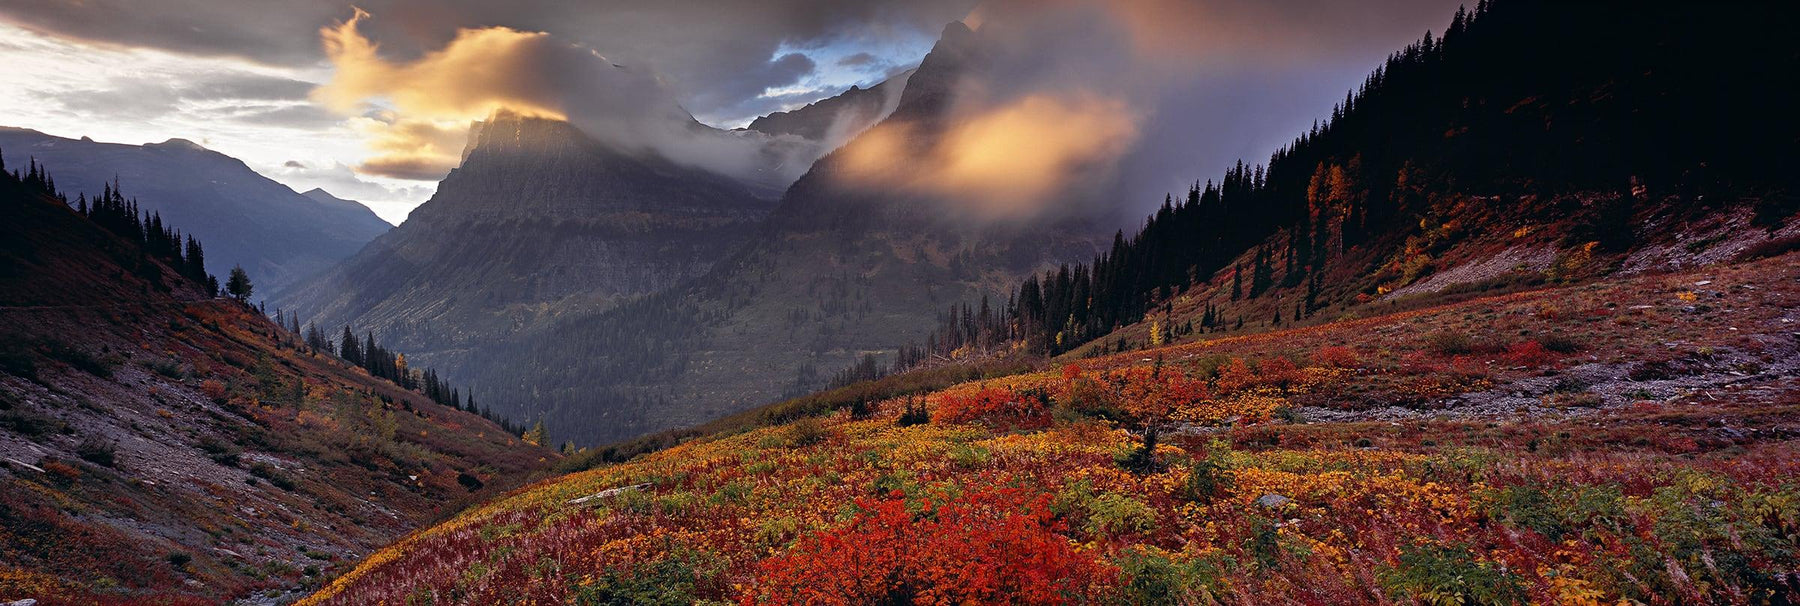 Sun shining on a colorful hill of plants with cloud covered mountains in back at Glacier National Park Montana 